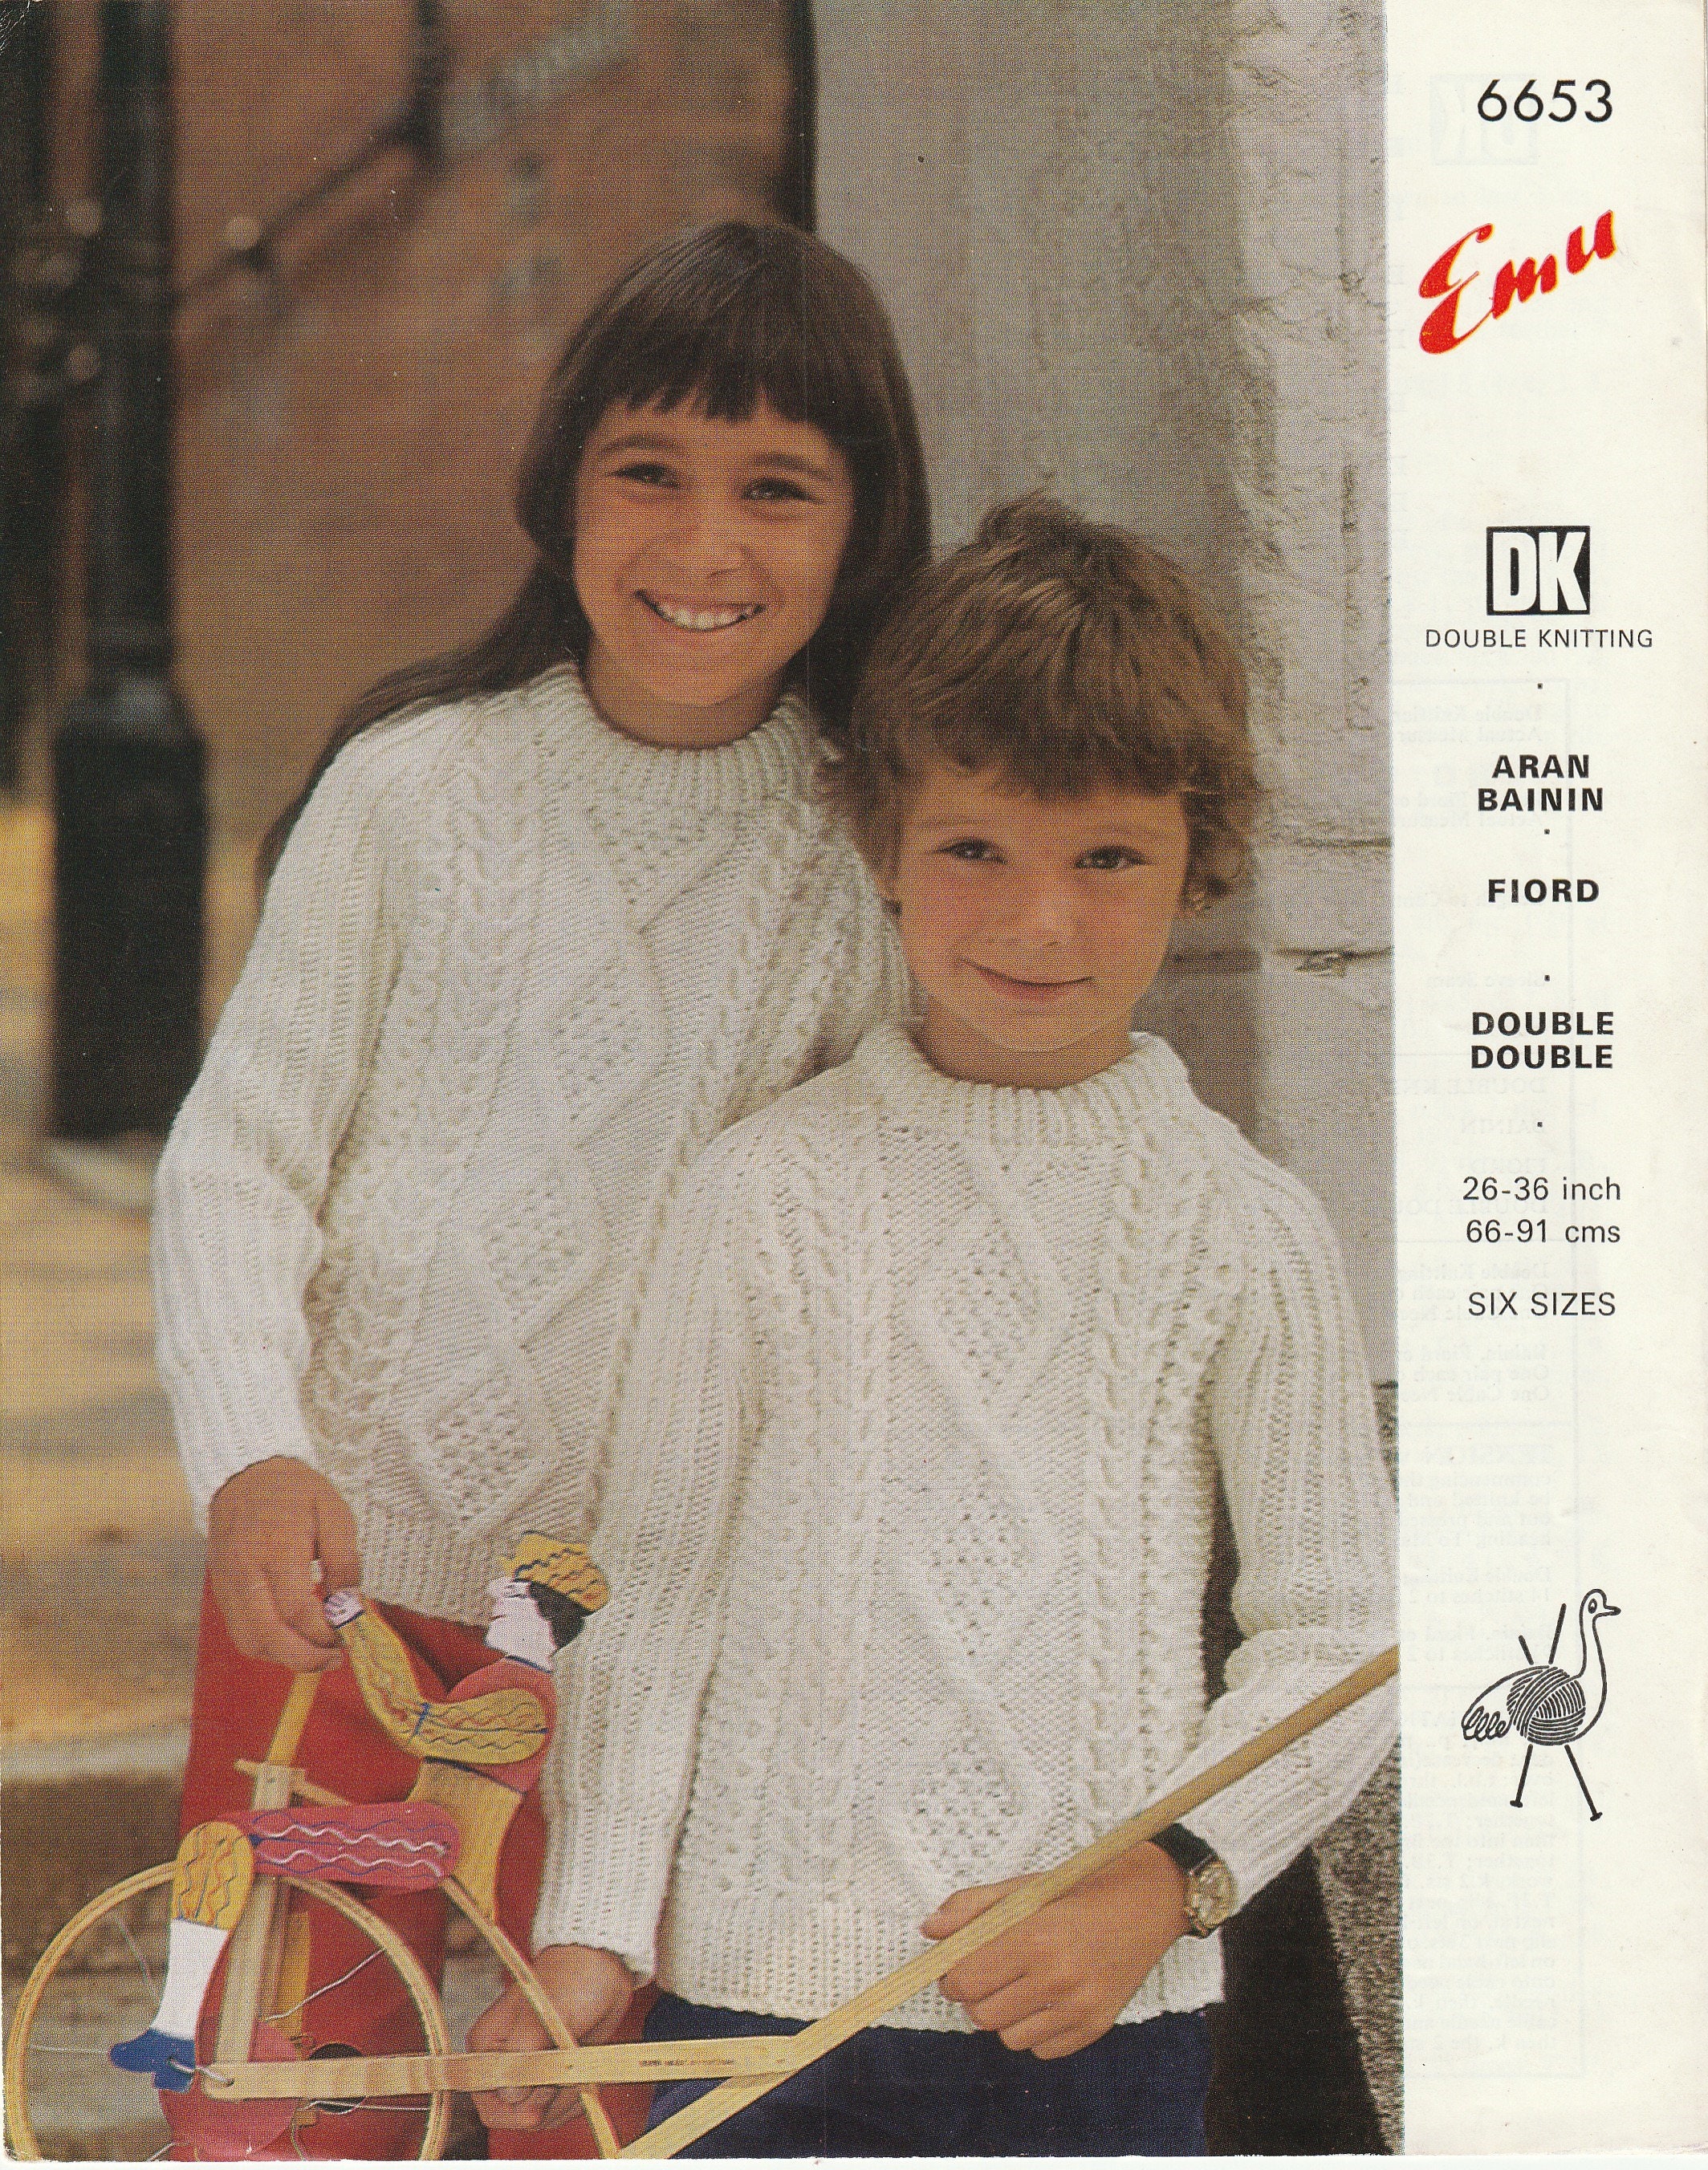 I want one!! It's a vintage Hobby-Knit, thought to be the best I